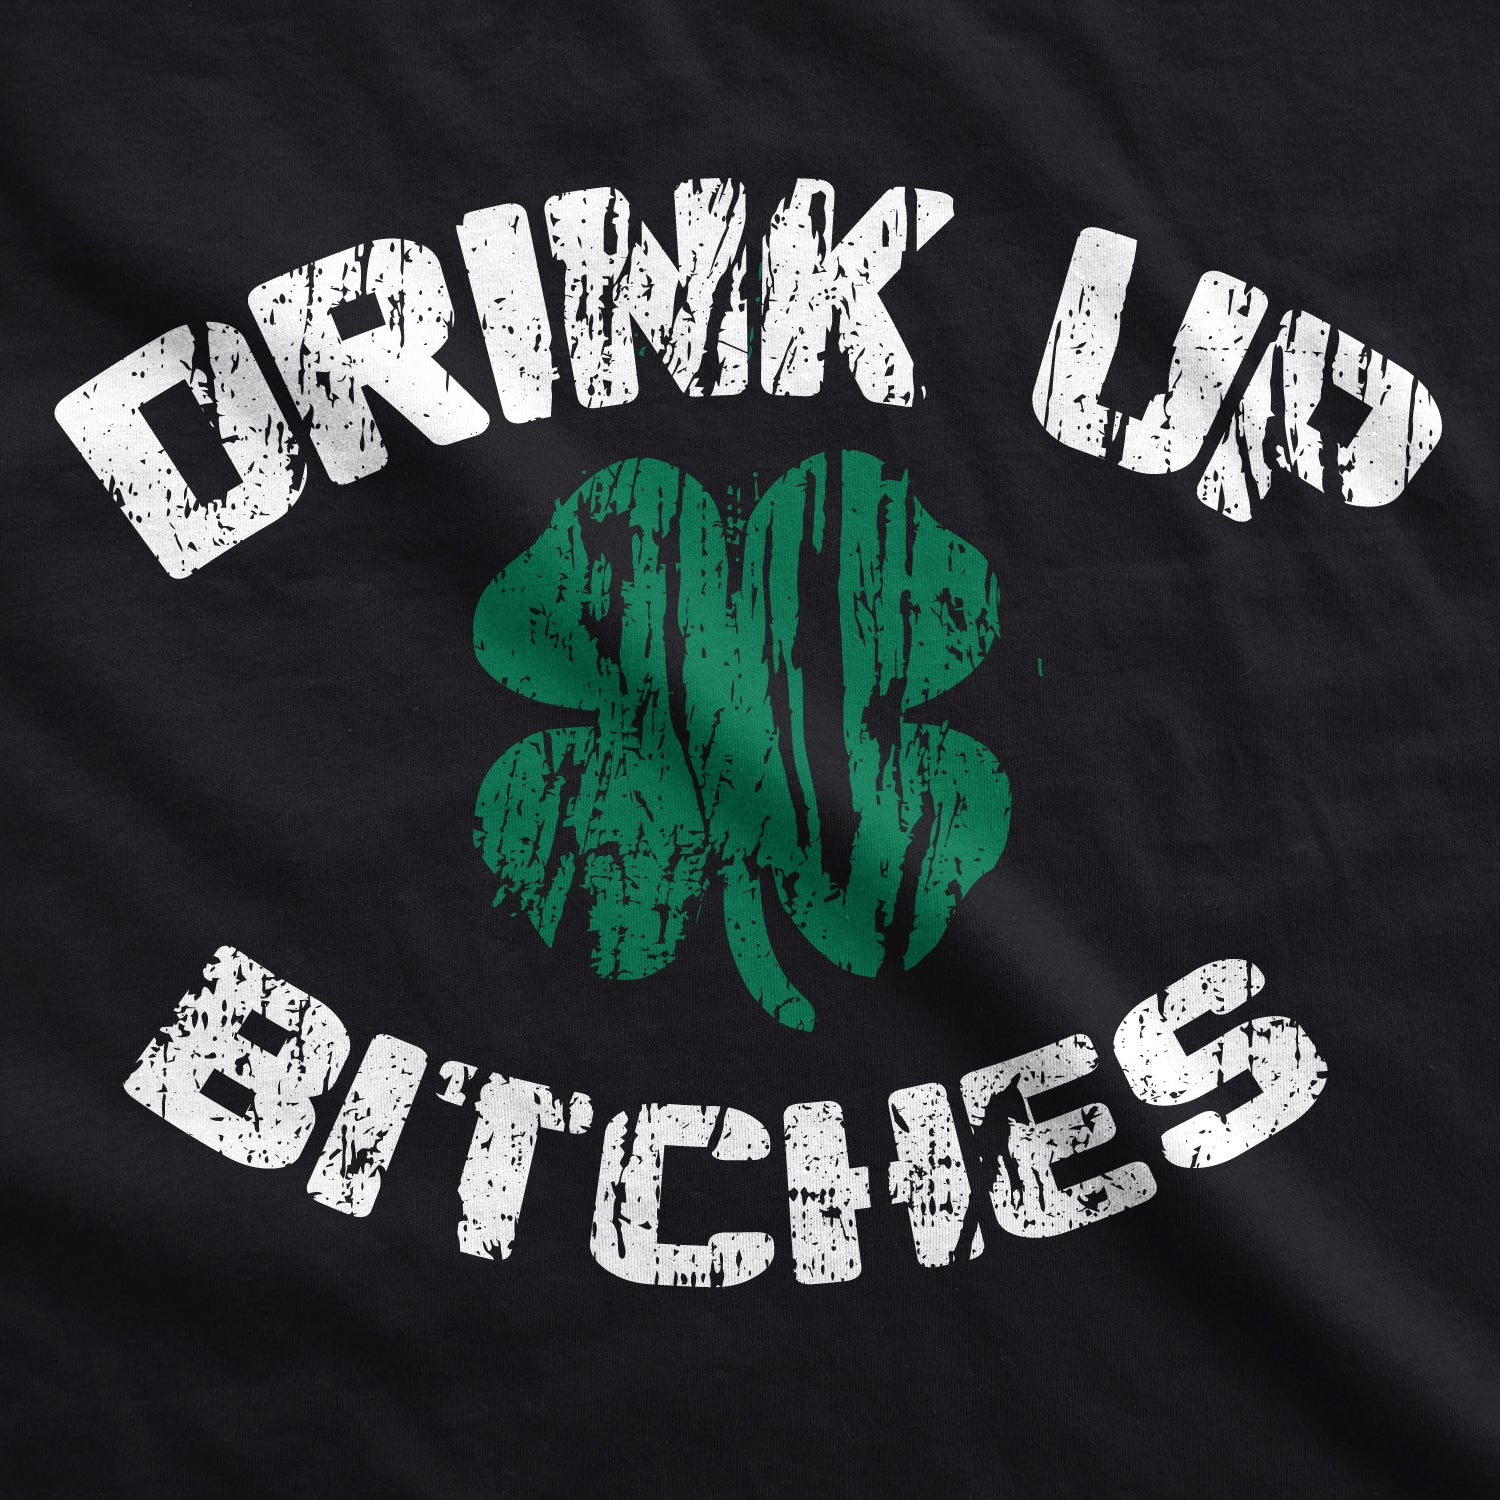 Funny Black Drink Up Bitches Mens T Shirt Nerdy Saint Patrick's Day Drinking Tee